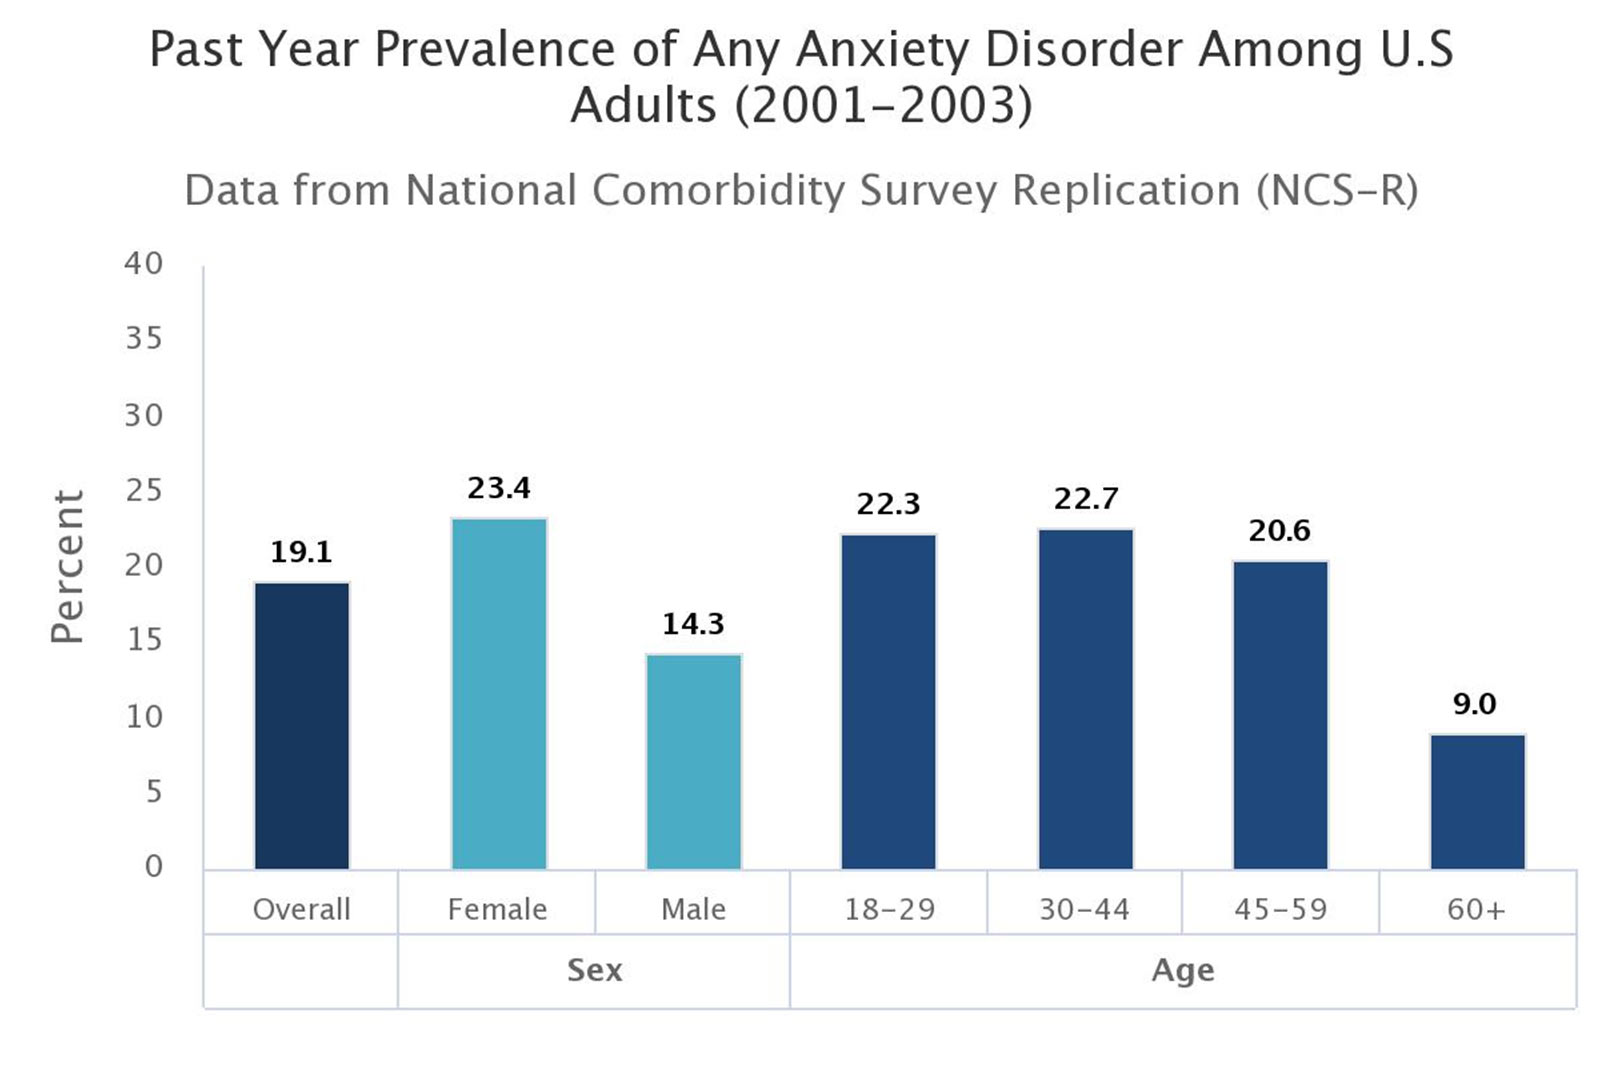 Past Year Prevalence of anxiety disorder (2001-2003)